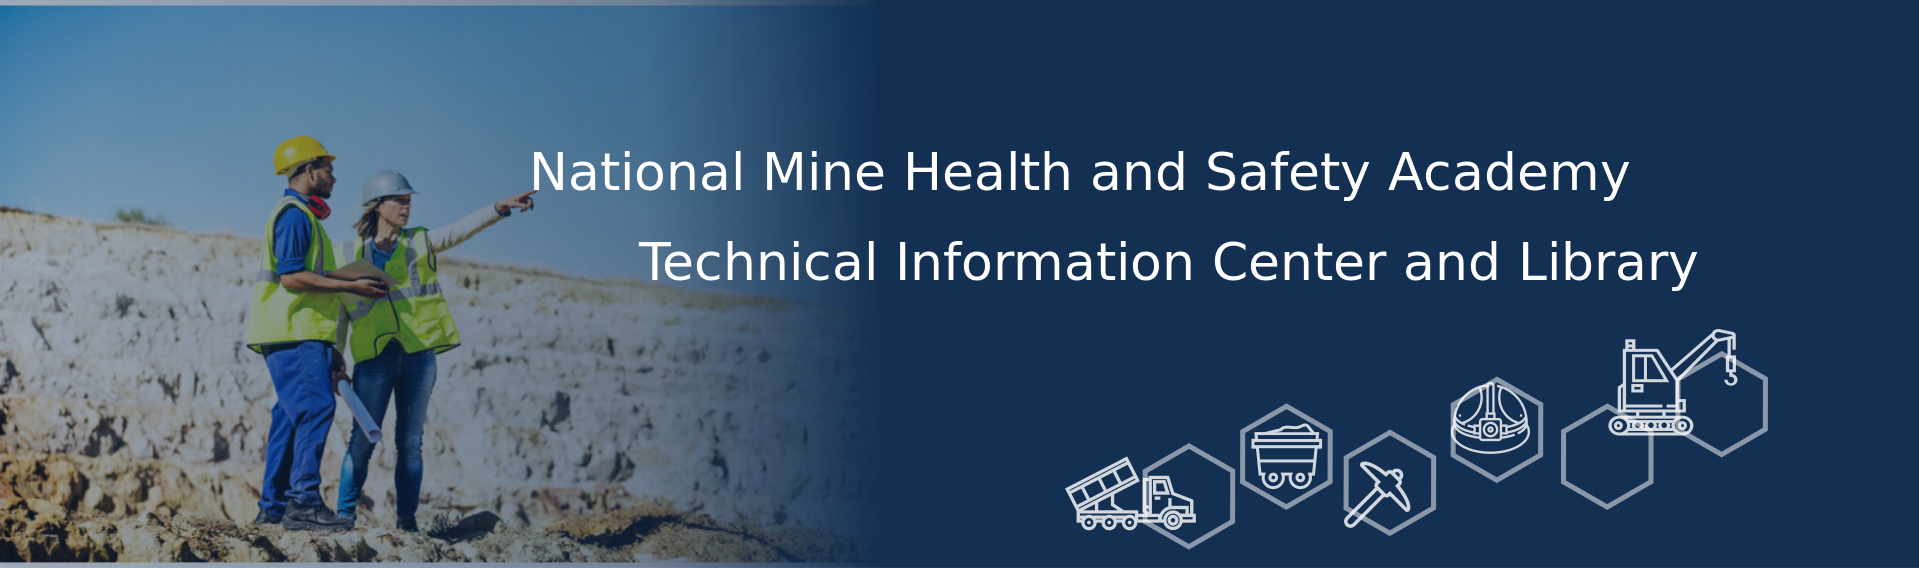 The MSHA Digital Library features materials related to the Mine Safety and Health Administration’s mission of ensuring the health and safety of the nation’s miners